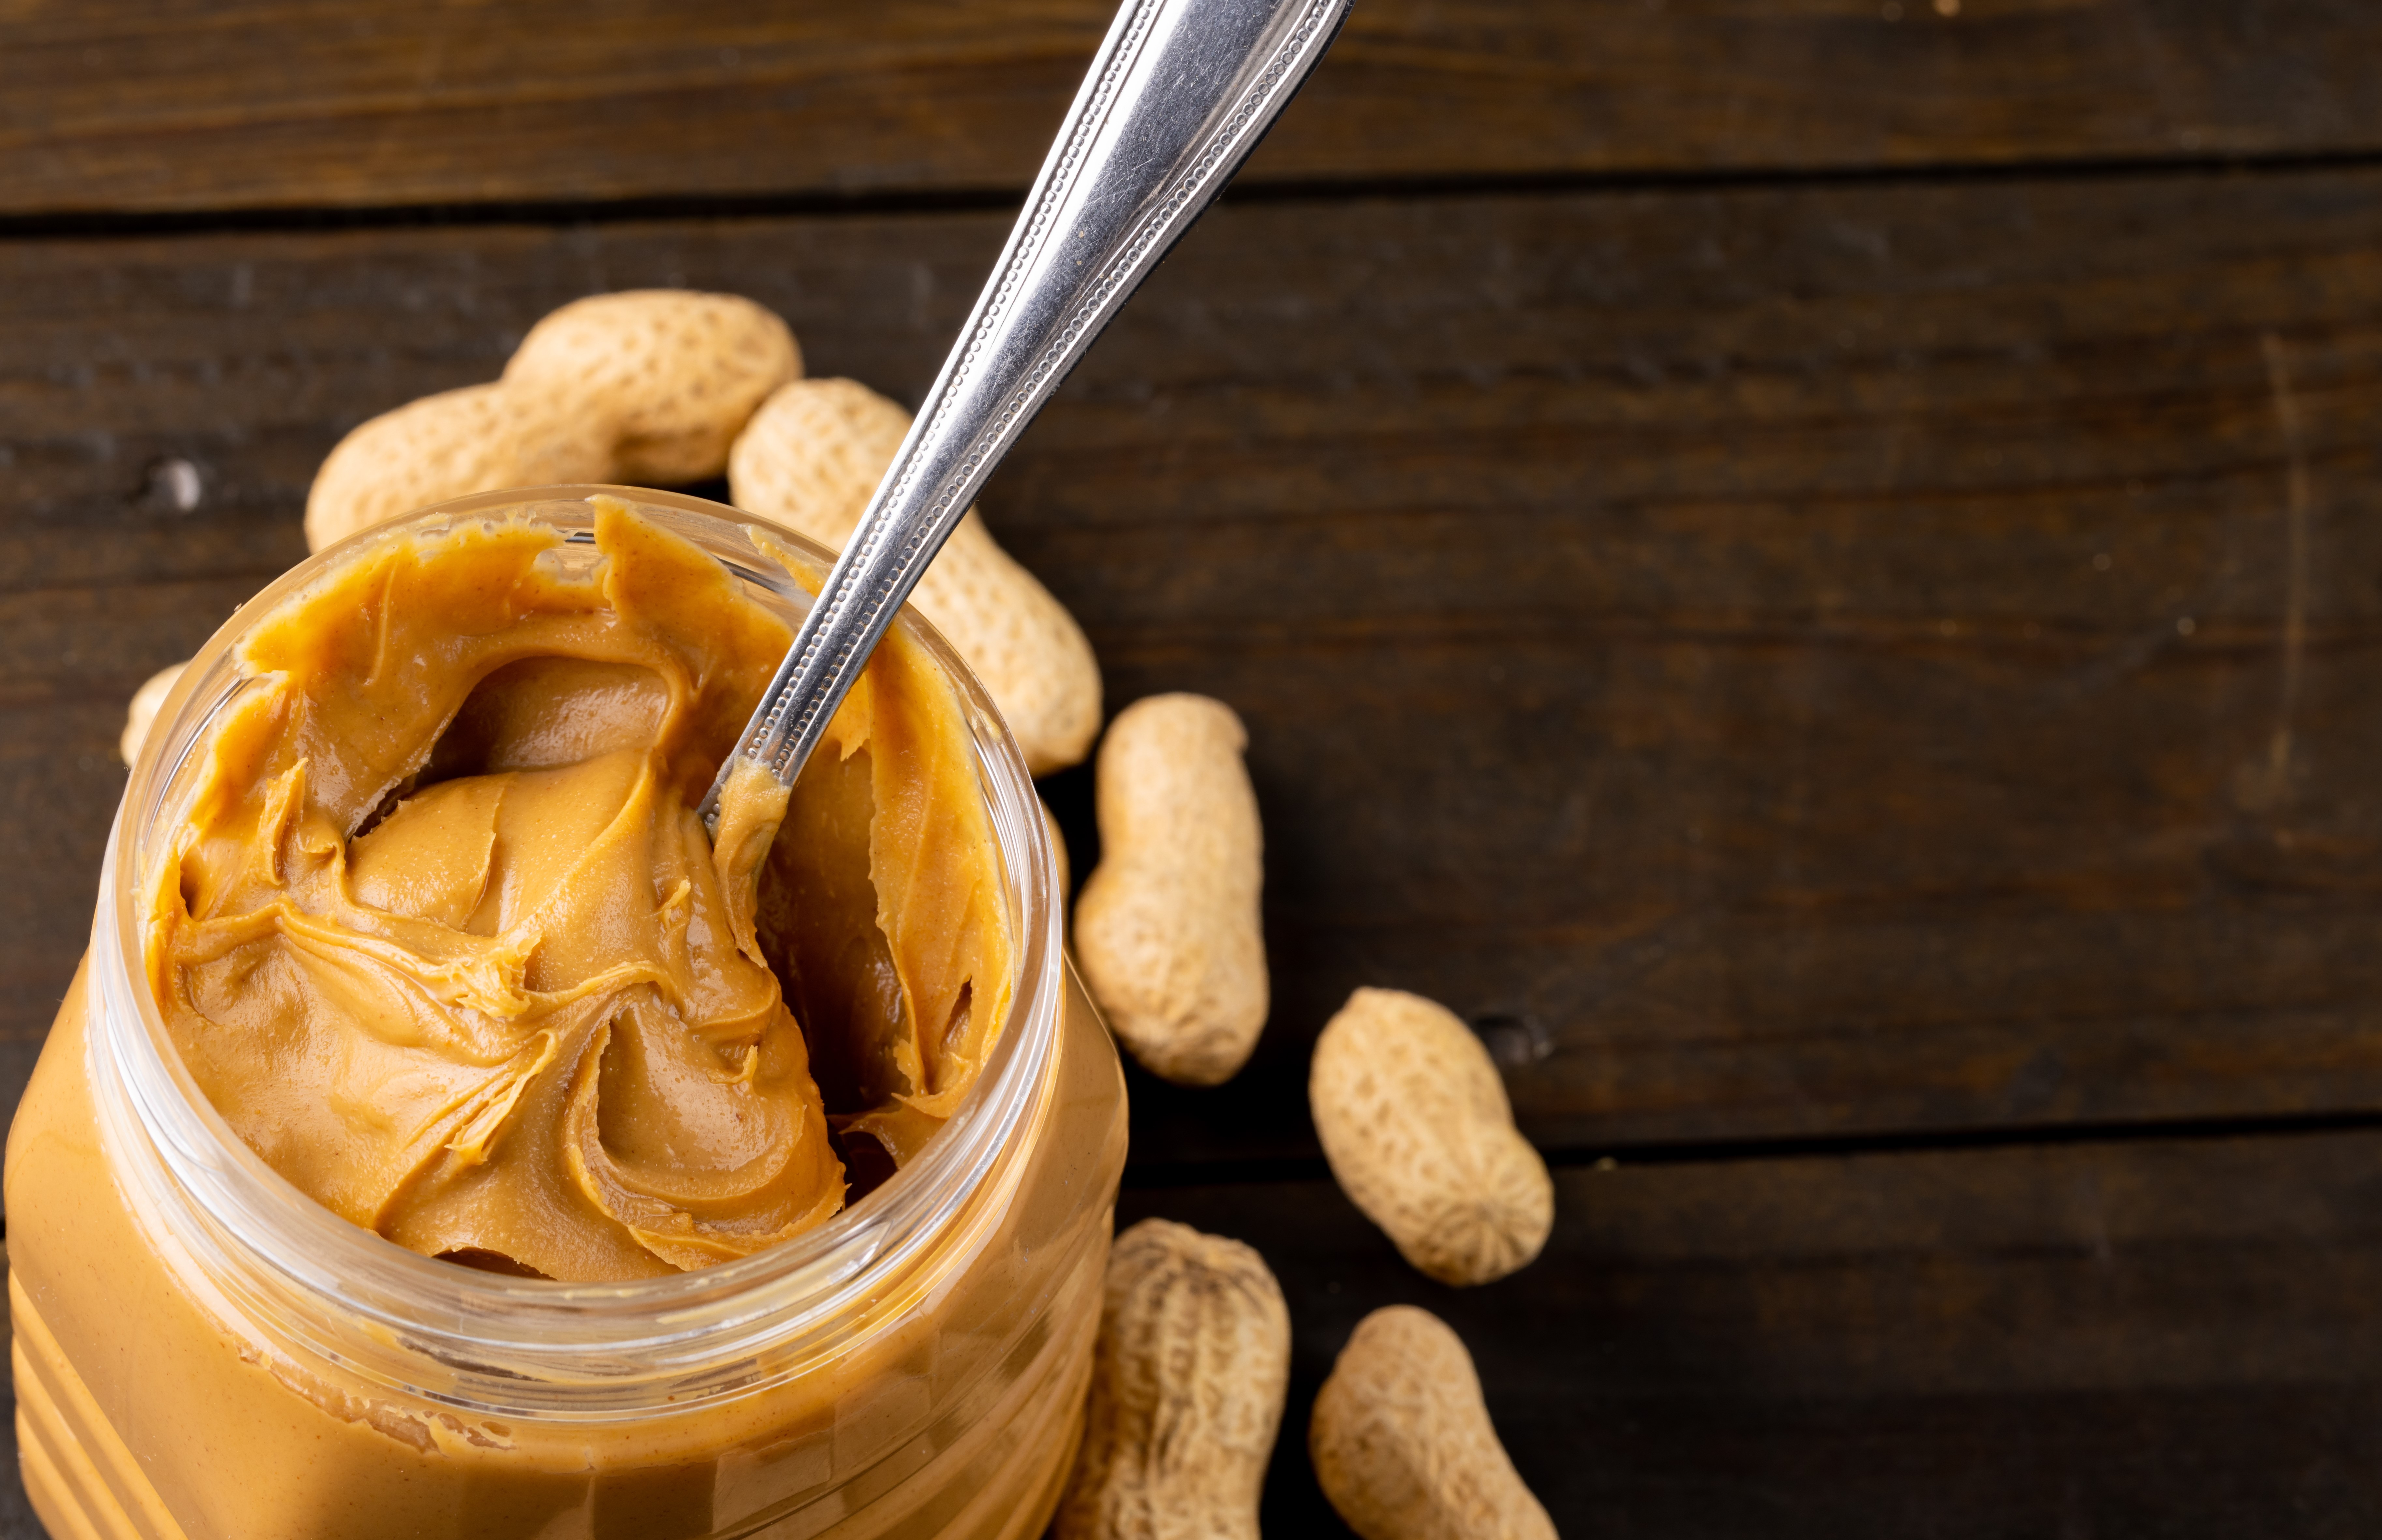 Image of jar with peanut butter and nuts on wooden surface